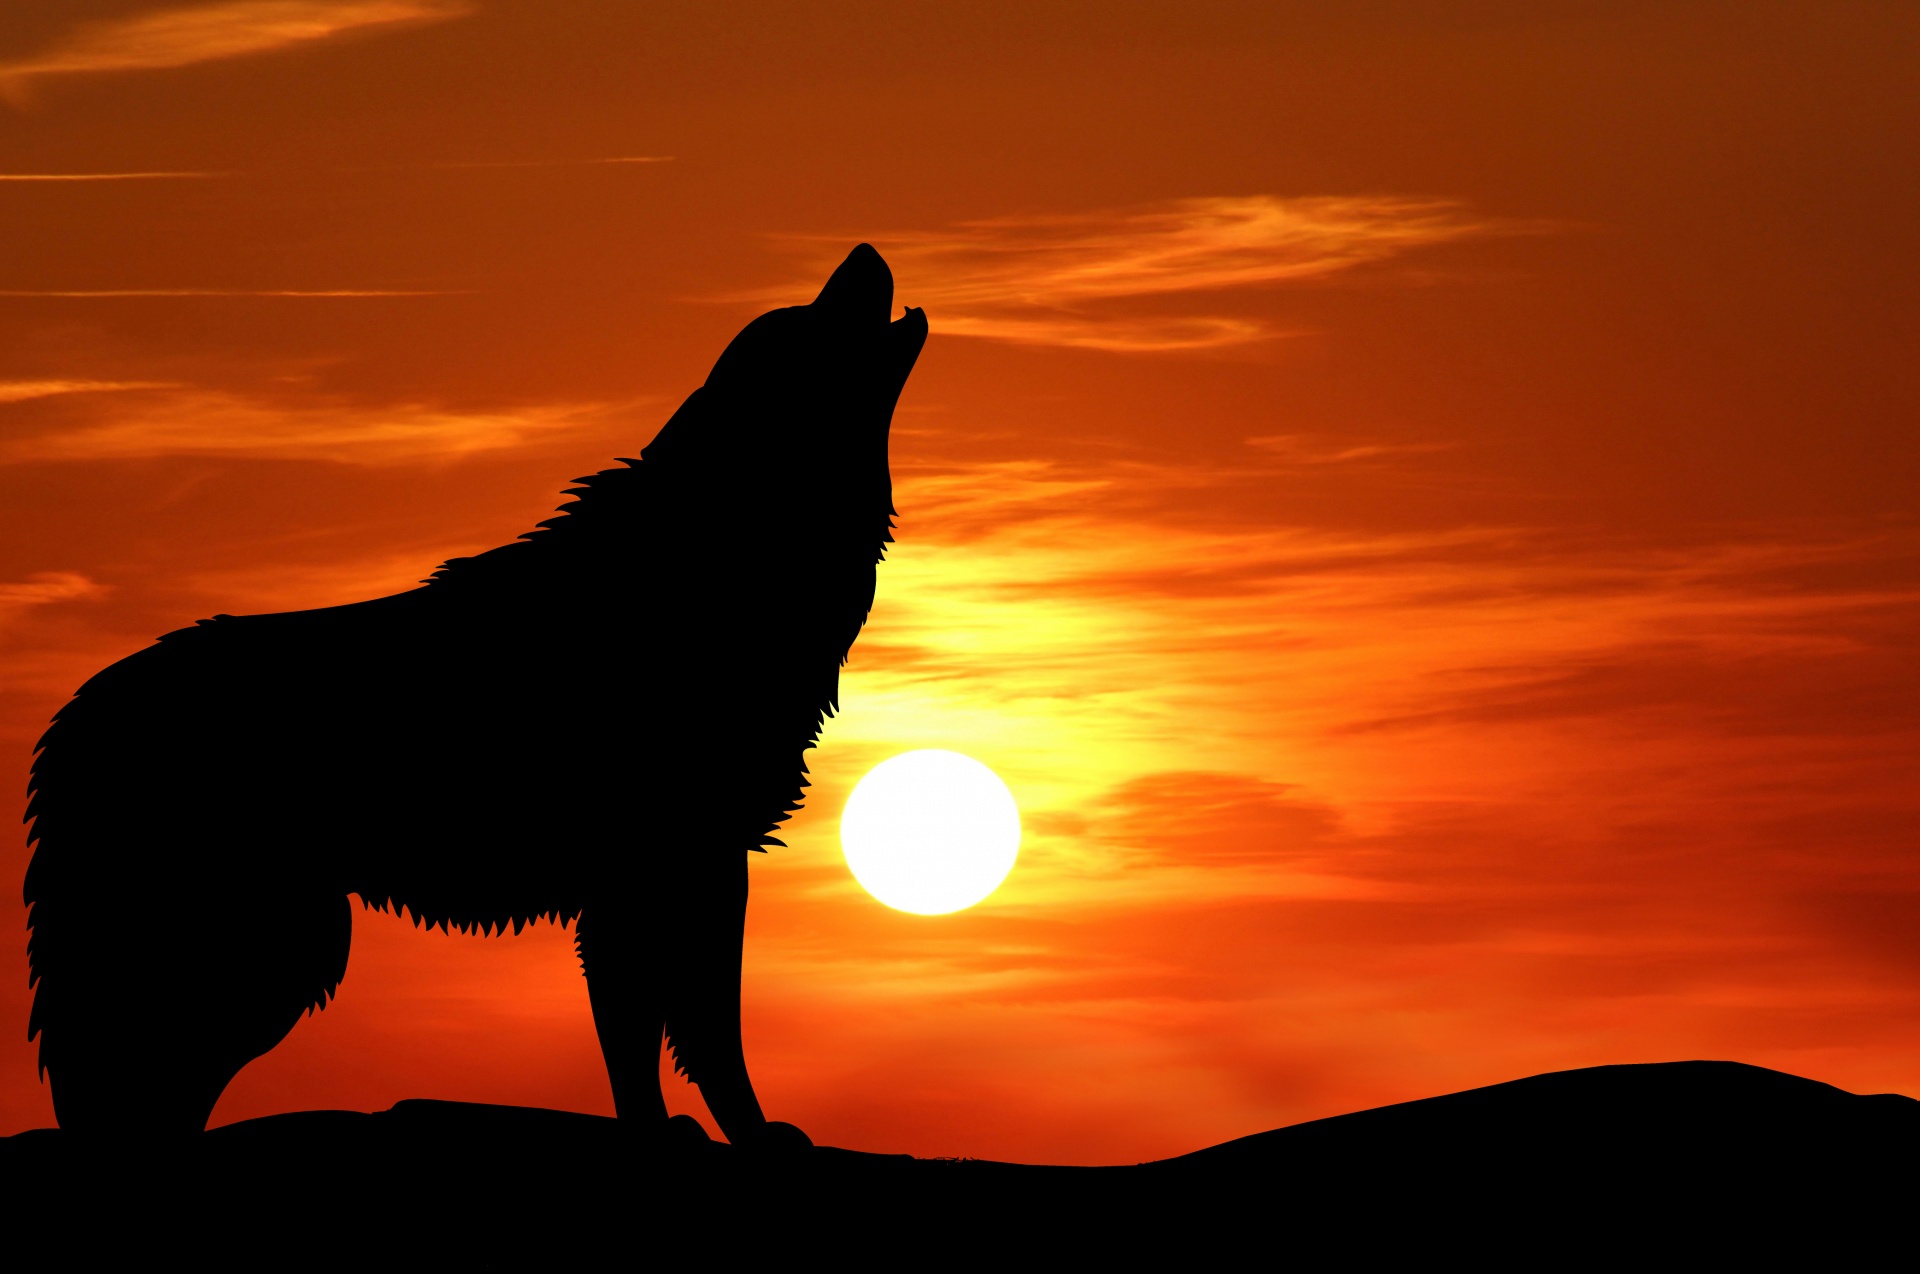 Silhouette of a howling wolf at sunset